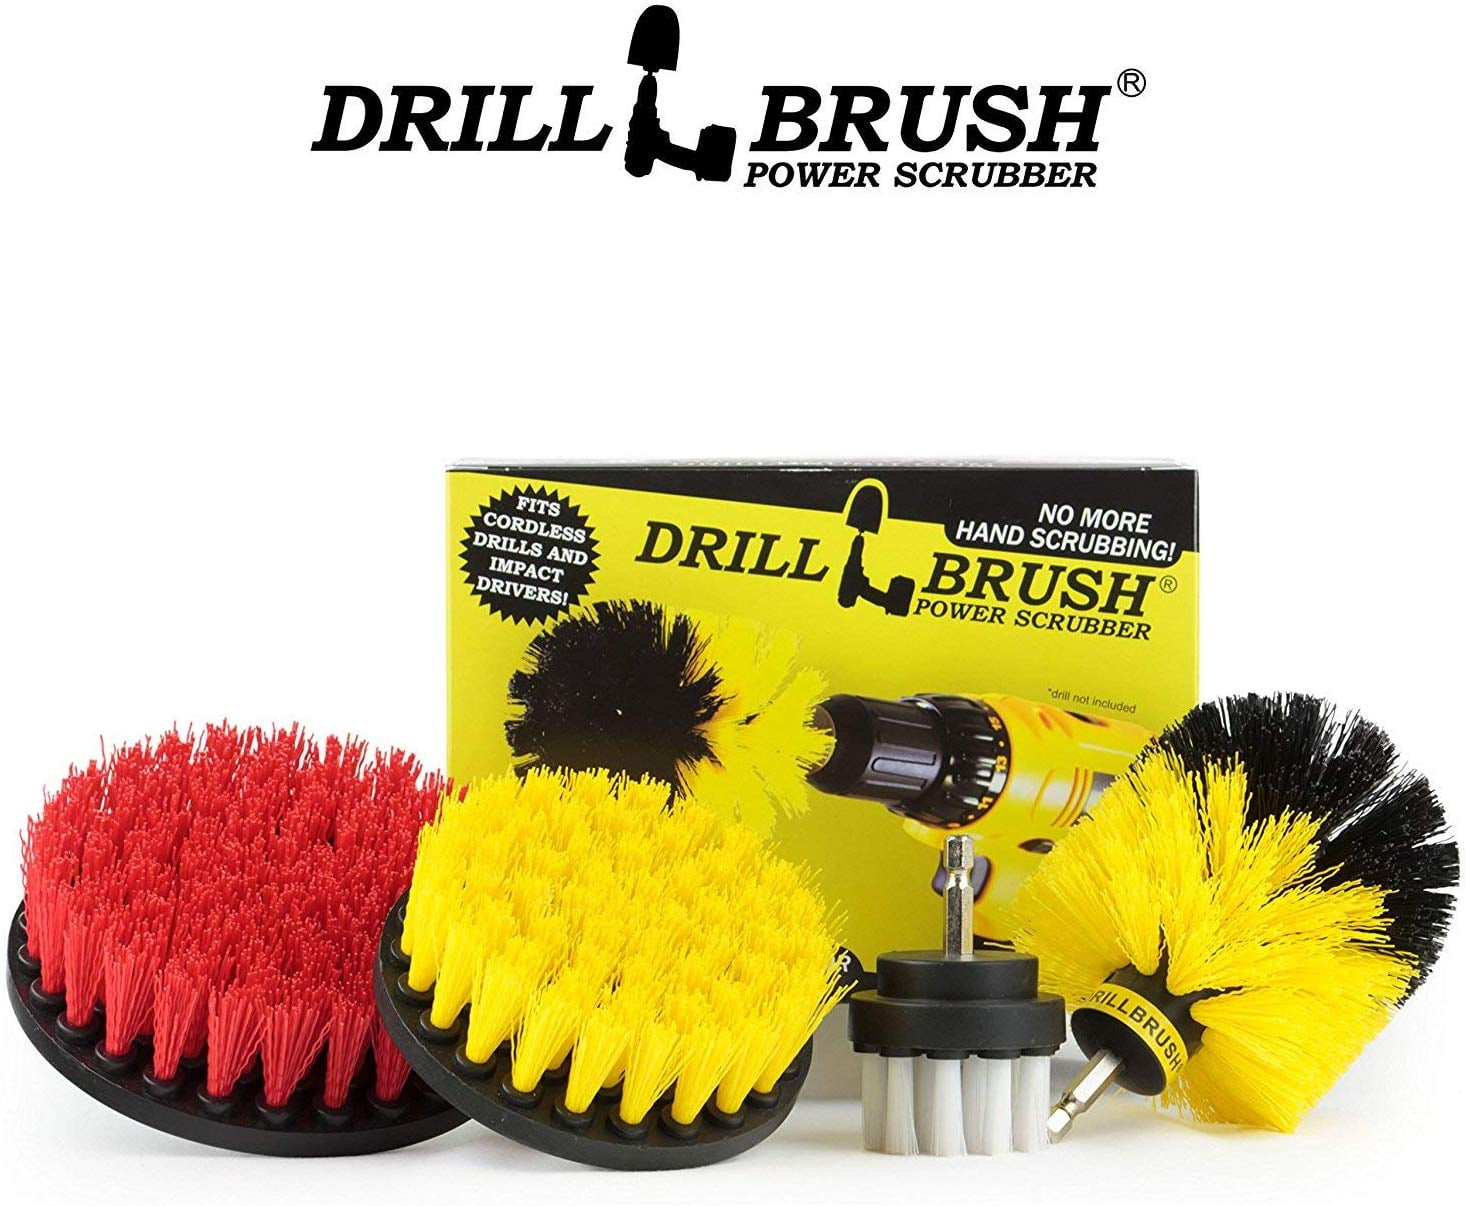 Auto Drill Brush Scrub Pads 10 Piece Power Scrubber Cleaning Kit Sinks Boat Blue Brick Bathtub Marble All Purpose Cleaner Scrubbing Cordless Drill for Cleaning Pool Tile Ceramic 